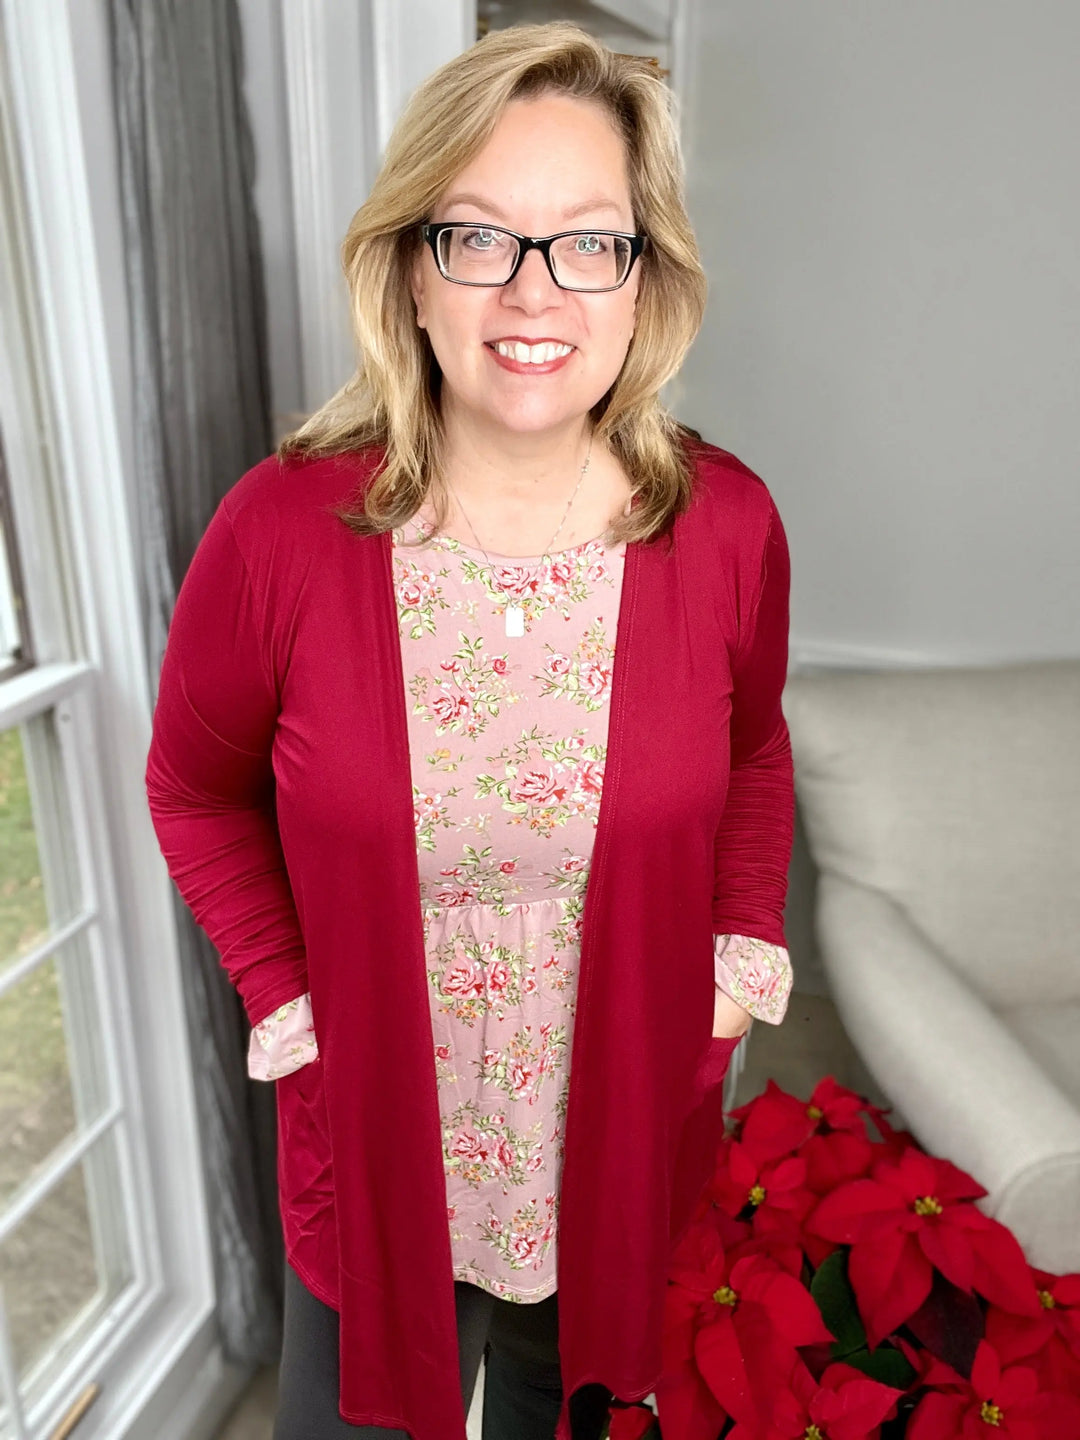 Long-Sleeved Lightweight Cardigan with Pockets - Dark Red-cardigan-Ninexis-Styled by Steph-Women's Fashion Clothing Boutique, Indiana